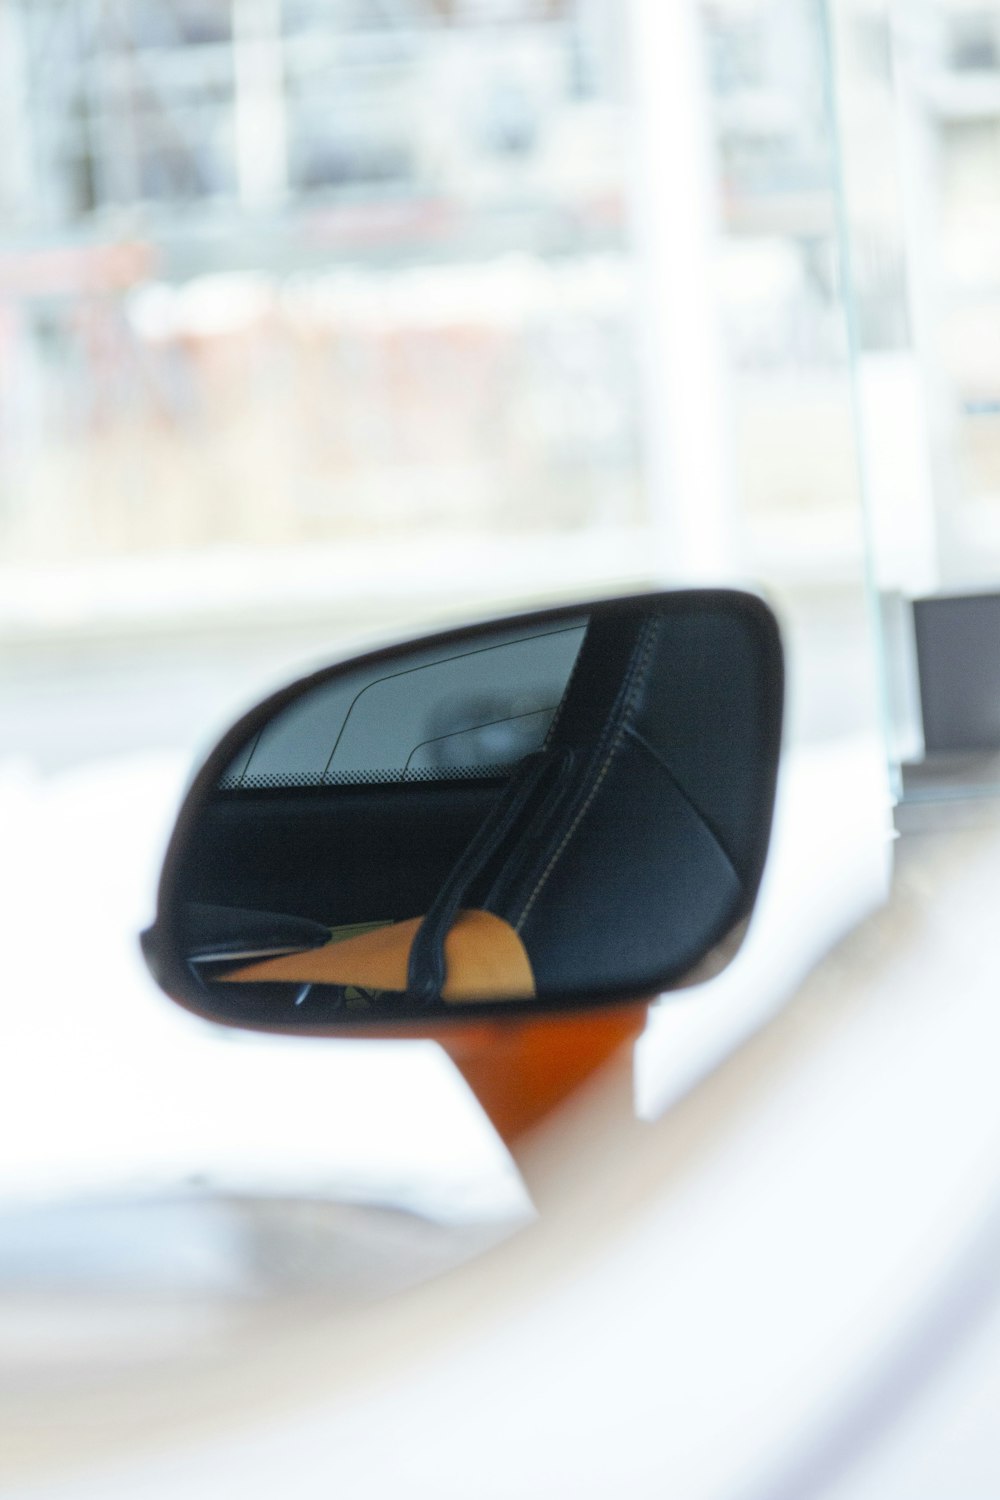 a side view mirror on a car with a building in the background